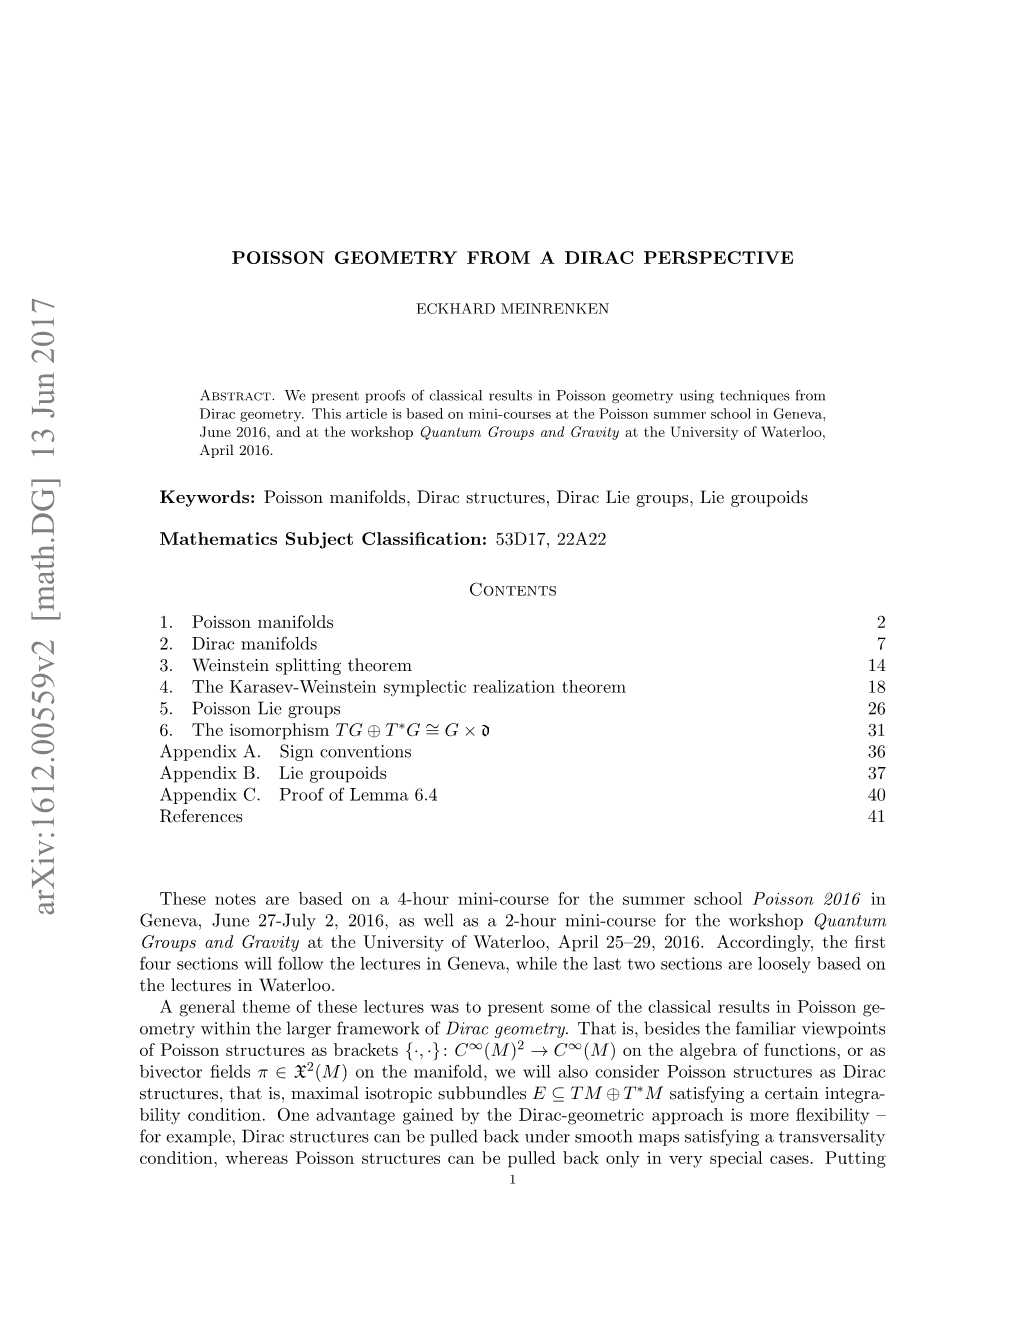 Poisson Geometry from a Dirac Perspective 11